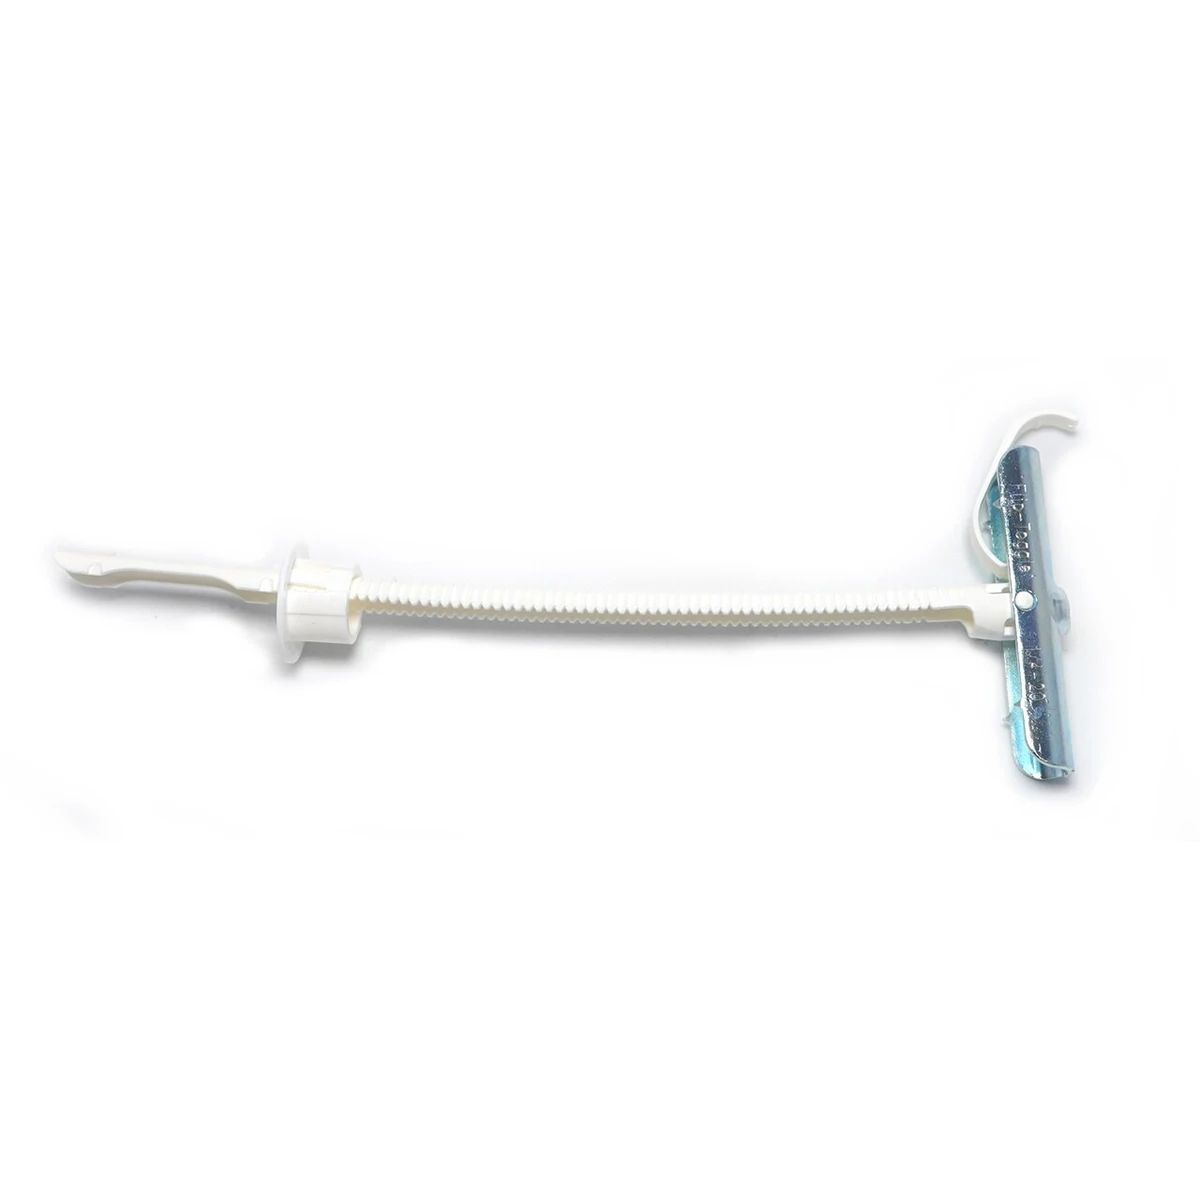 Drywall Flip Toggle Anchor With Screw Bolt